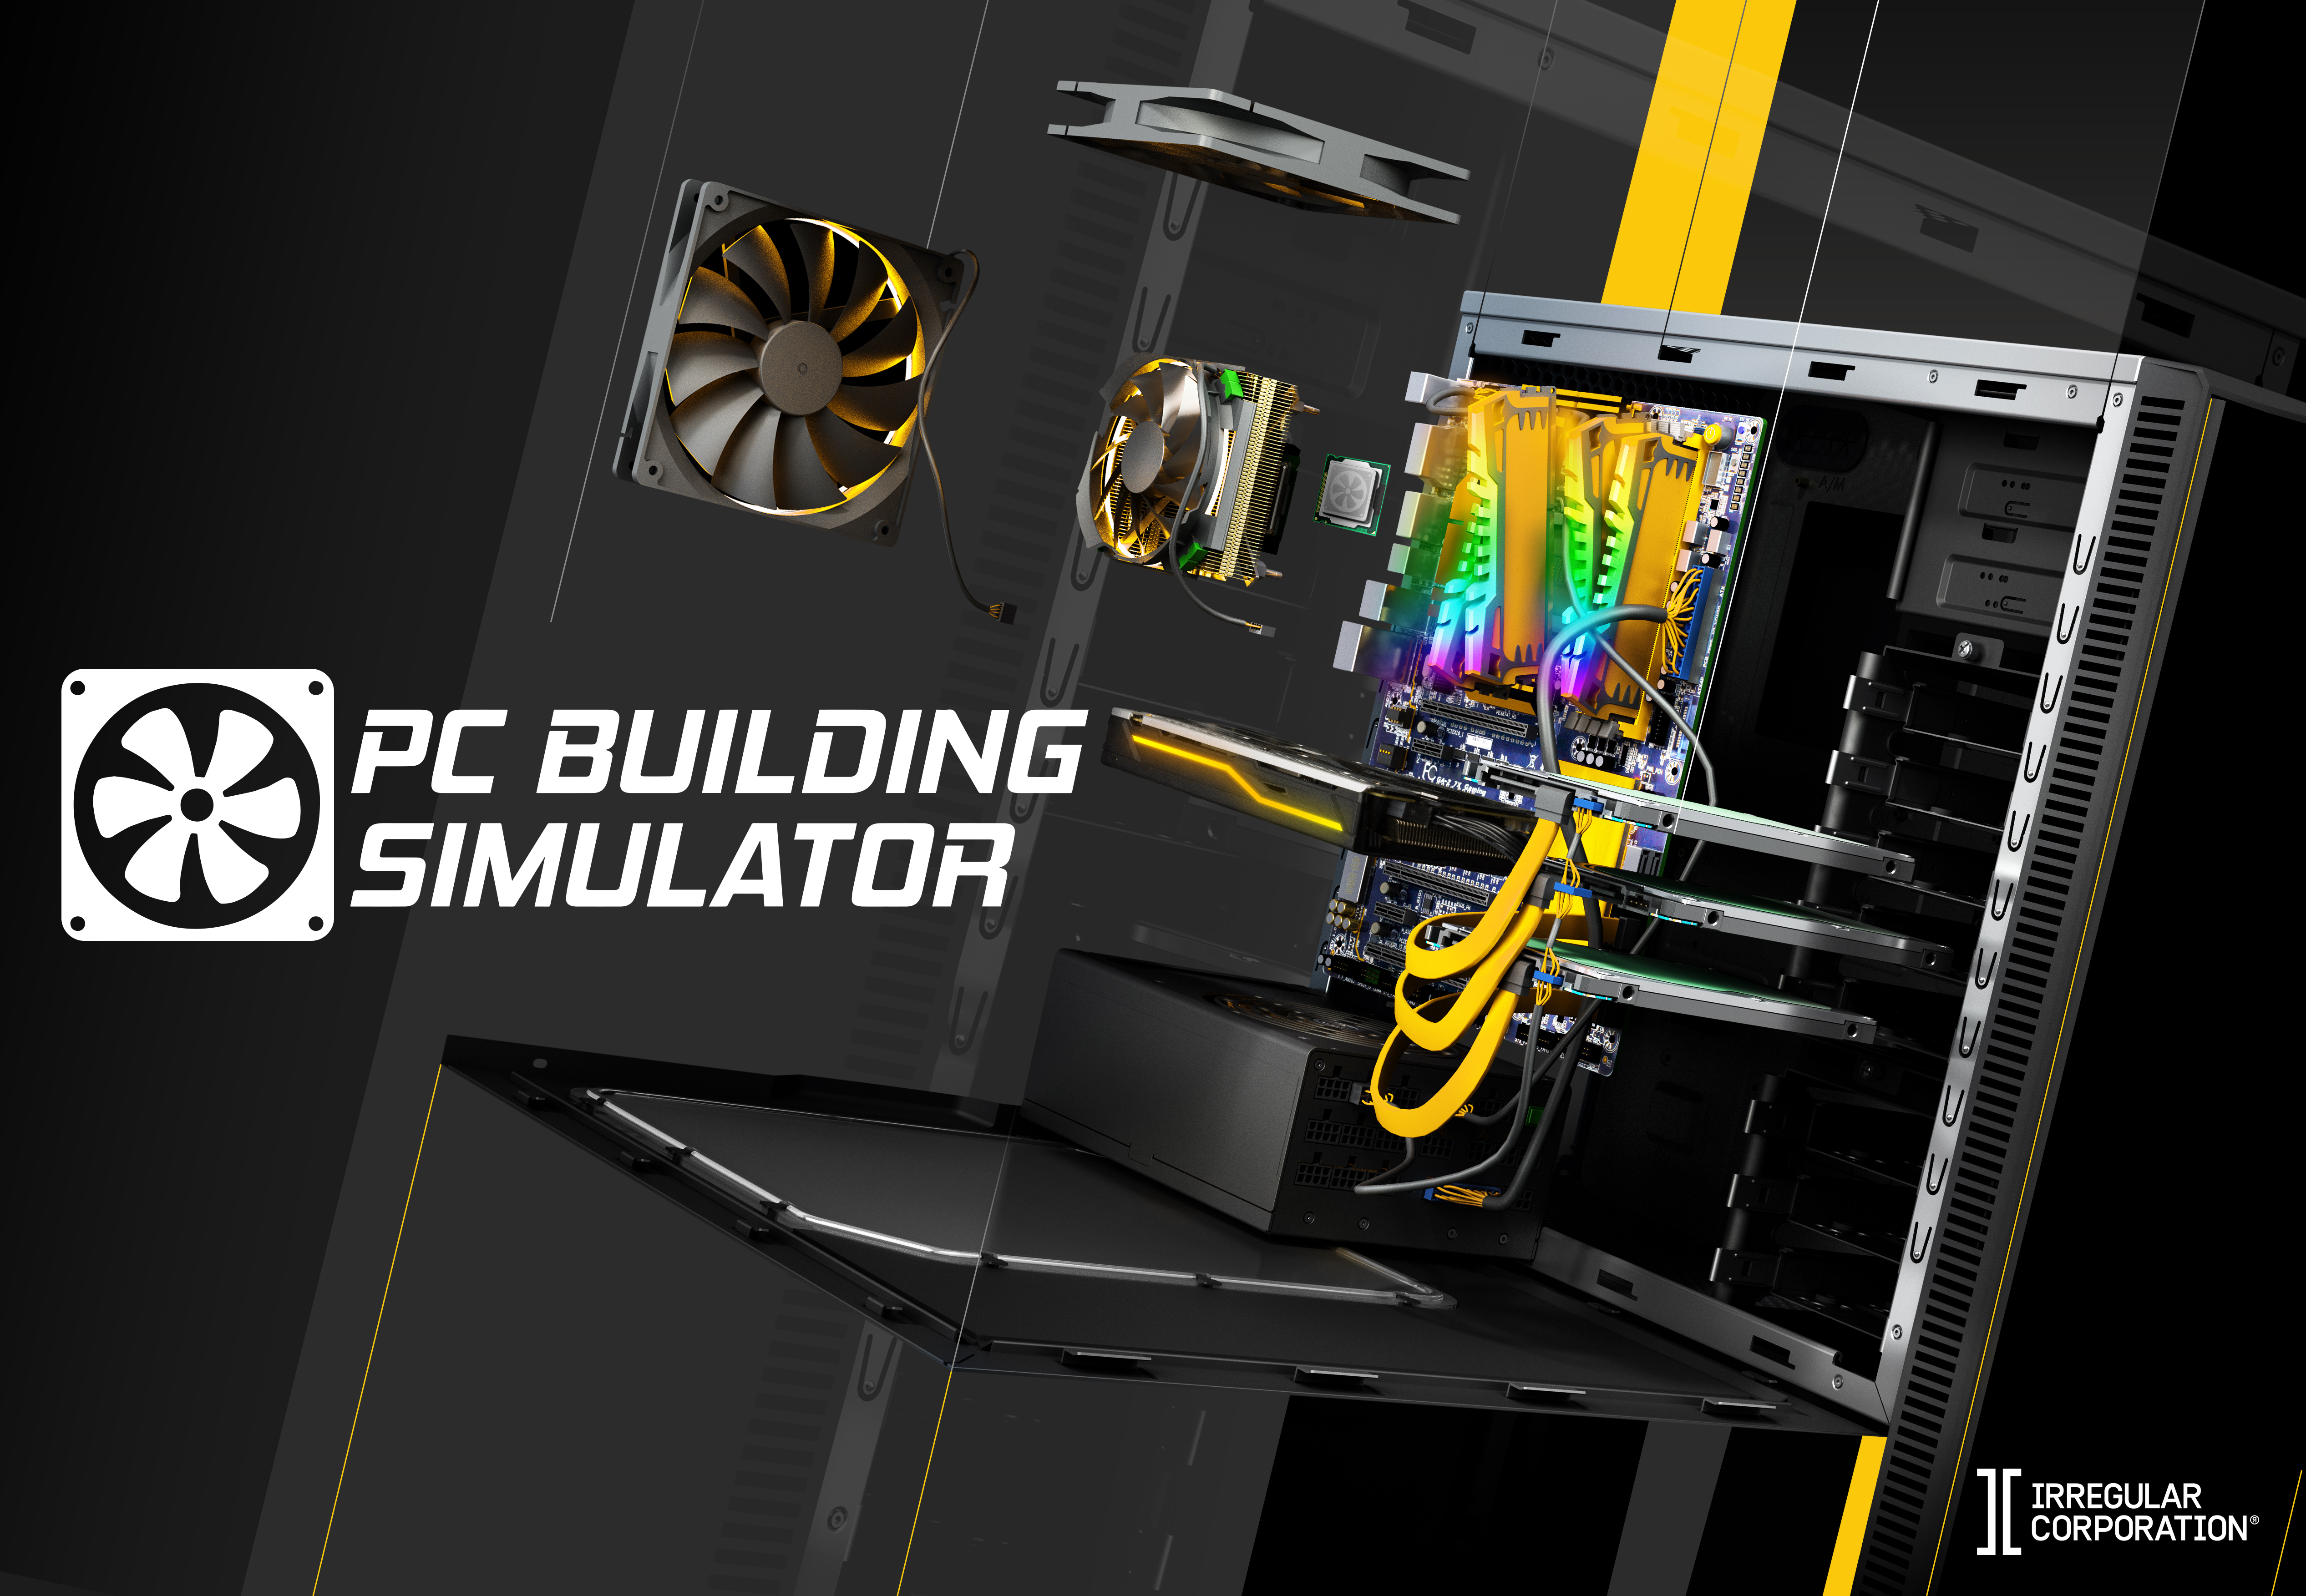 Building Simulator adds GeForce RTX GPUs As Leaves Early Access | News | NVIDIA